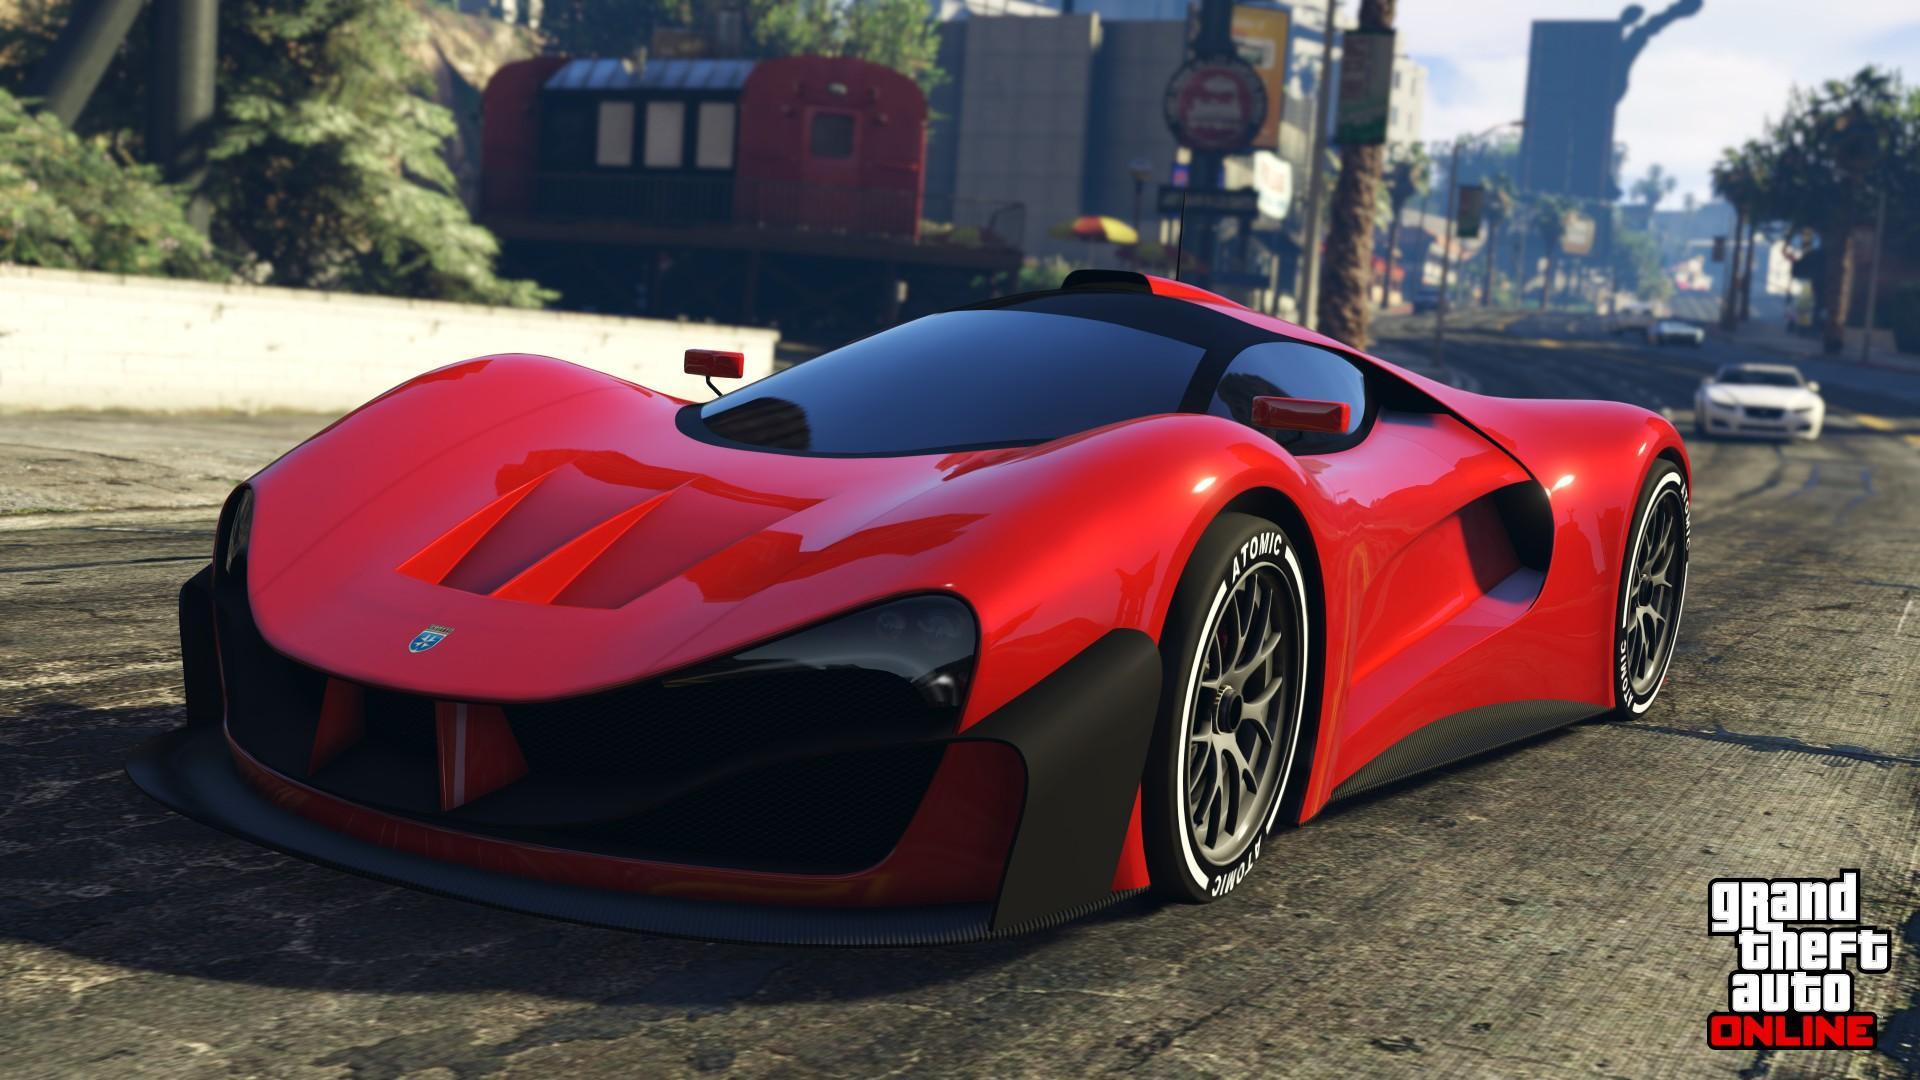 Which cars have blacked out Windshields? : r/gtaonline